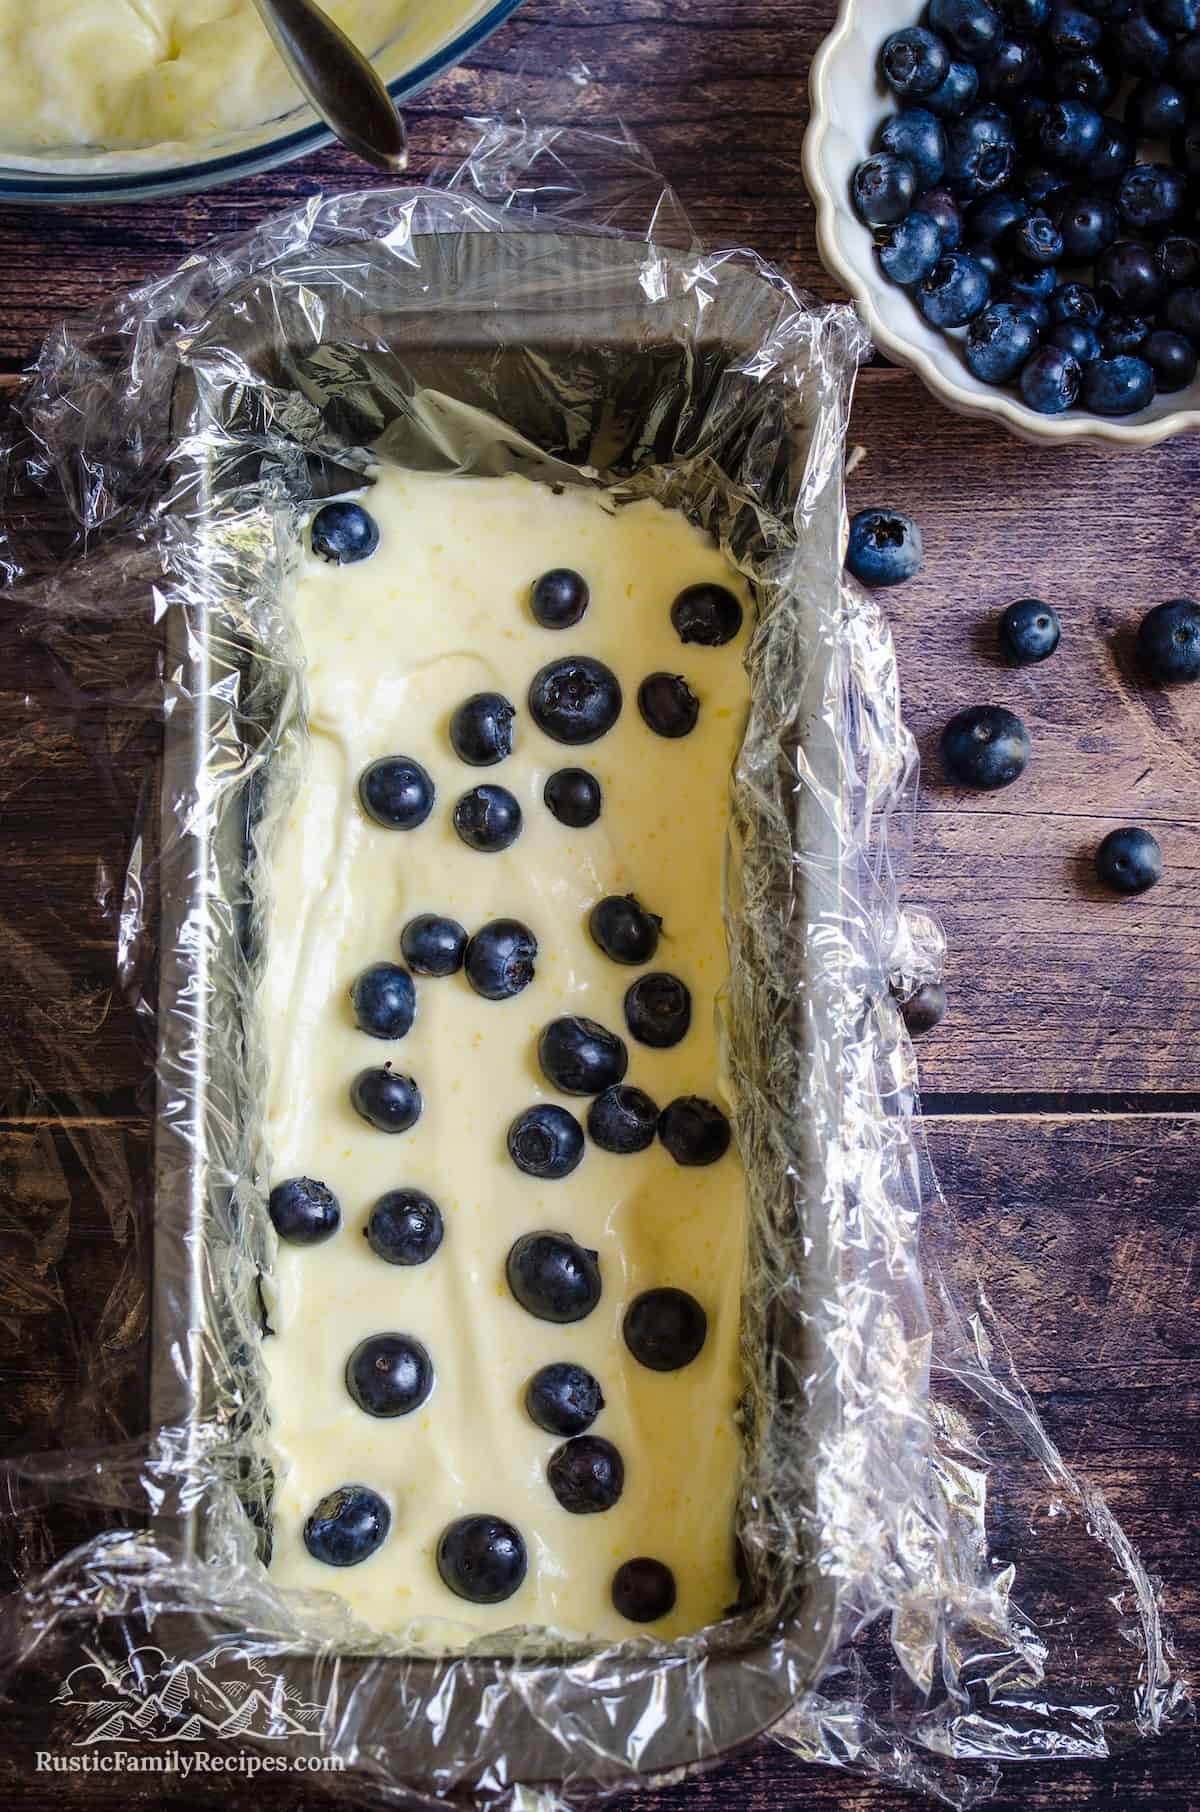 Lemon semifreddo mixture in a rectangular loaf pan lined with plastic wrap, topped with a layer of fresh blueberries.